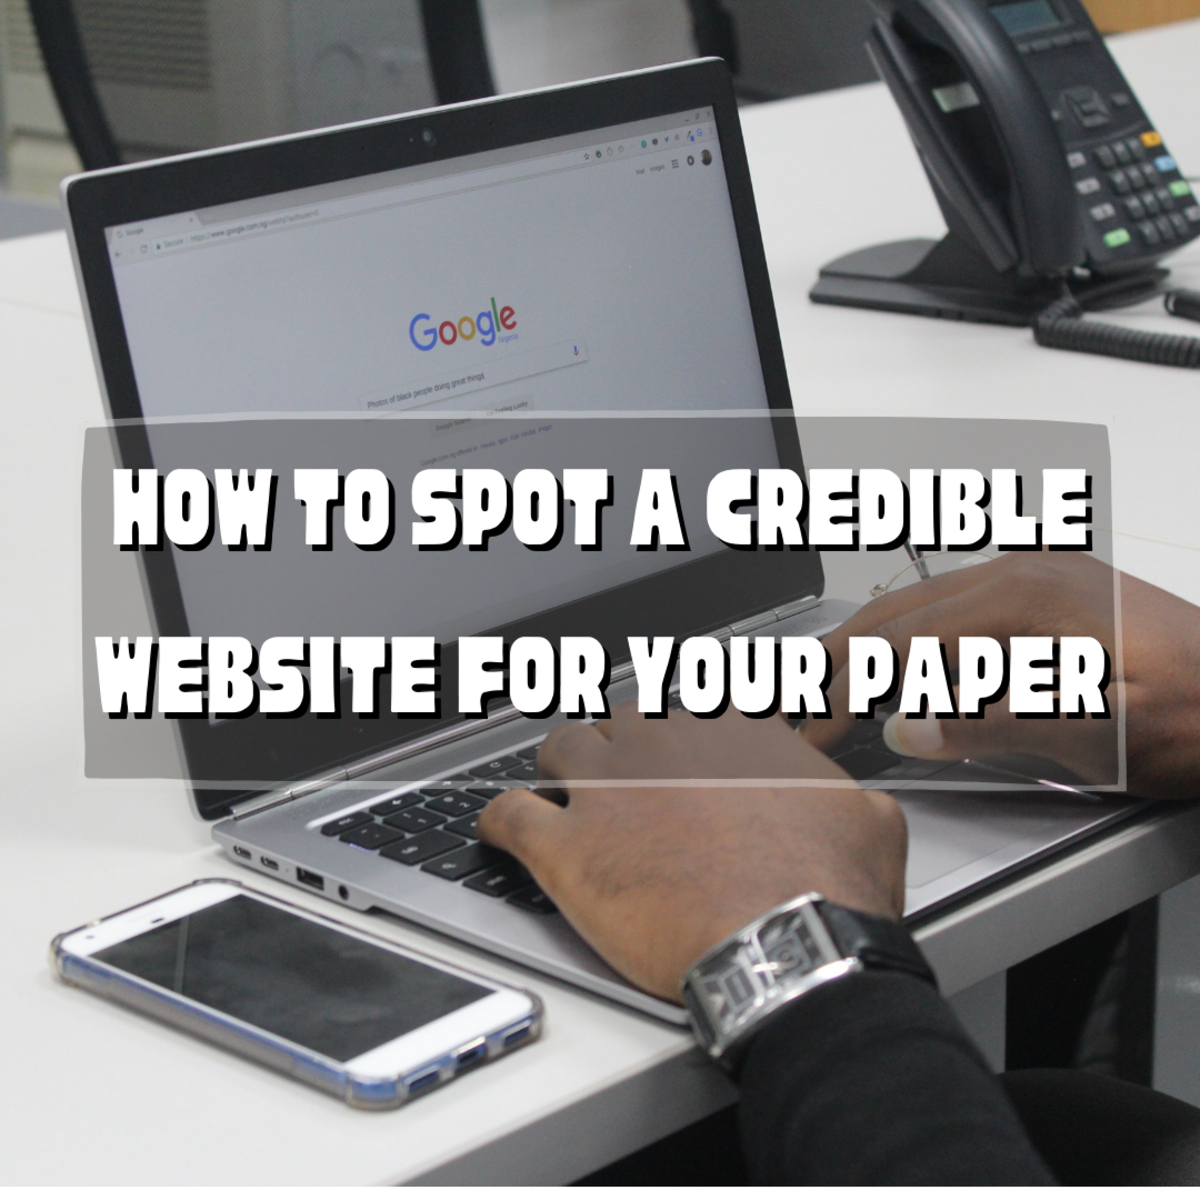 Read on to learn how to find credible sources online for your school papers.